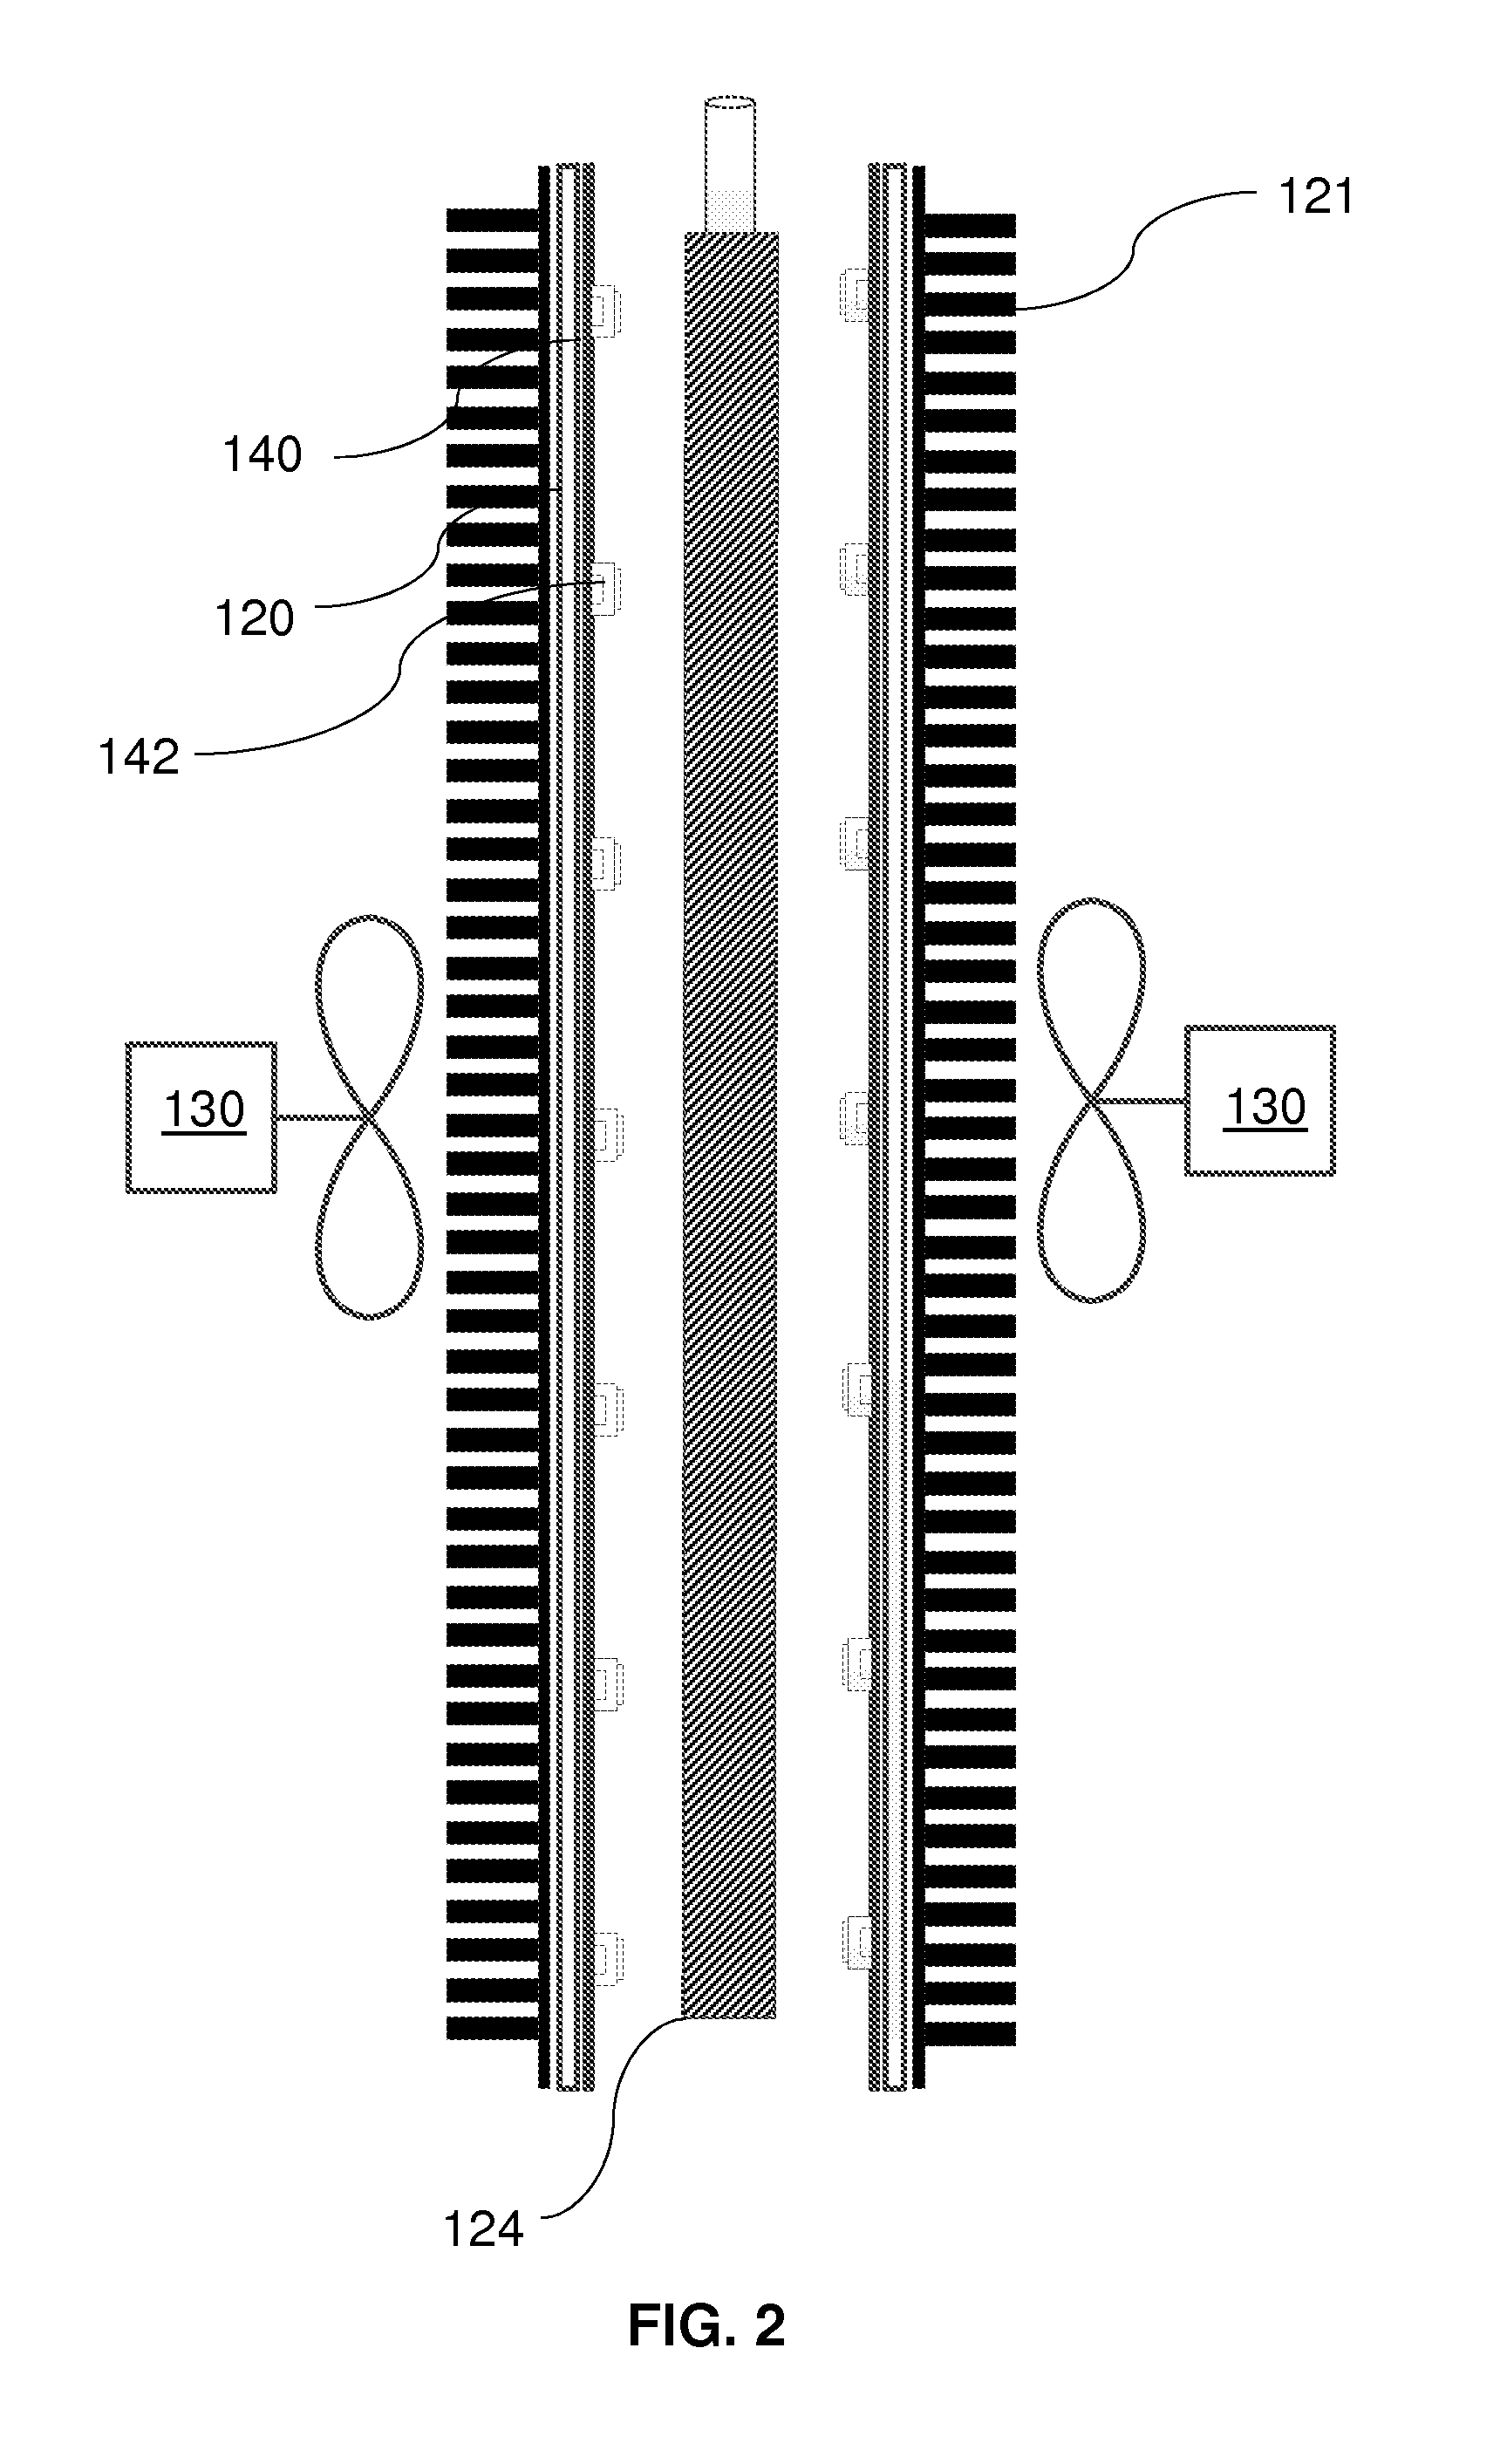 Systems and methods for reduction of pathogens in a biological fluid using variable fluid flow and ultraviolet light irradiation